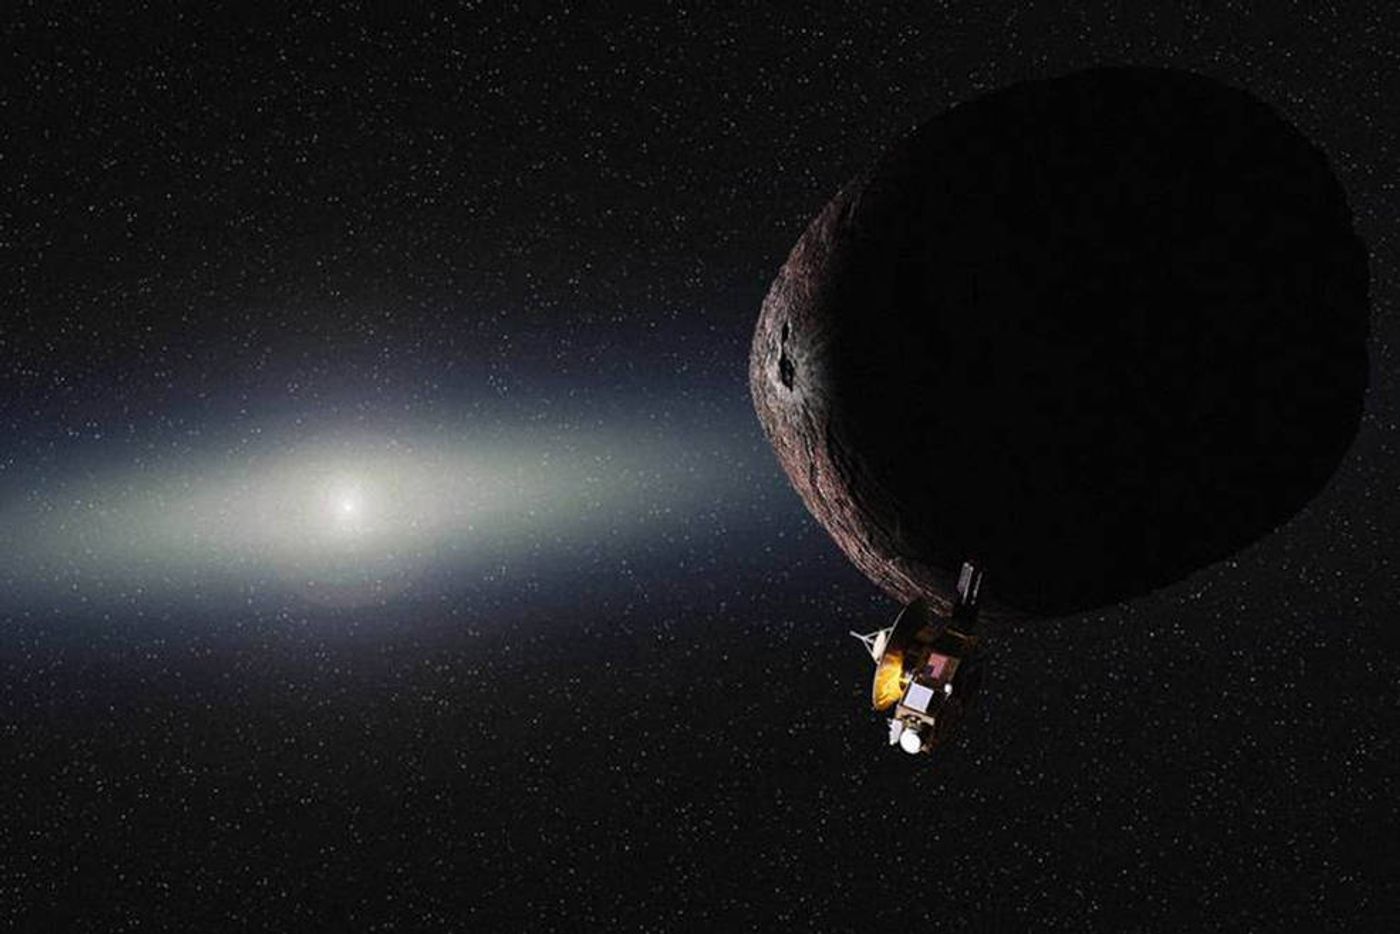 An artist's impression of the New Horizons spacecraft flying past Ultima Thule.